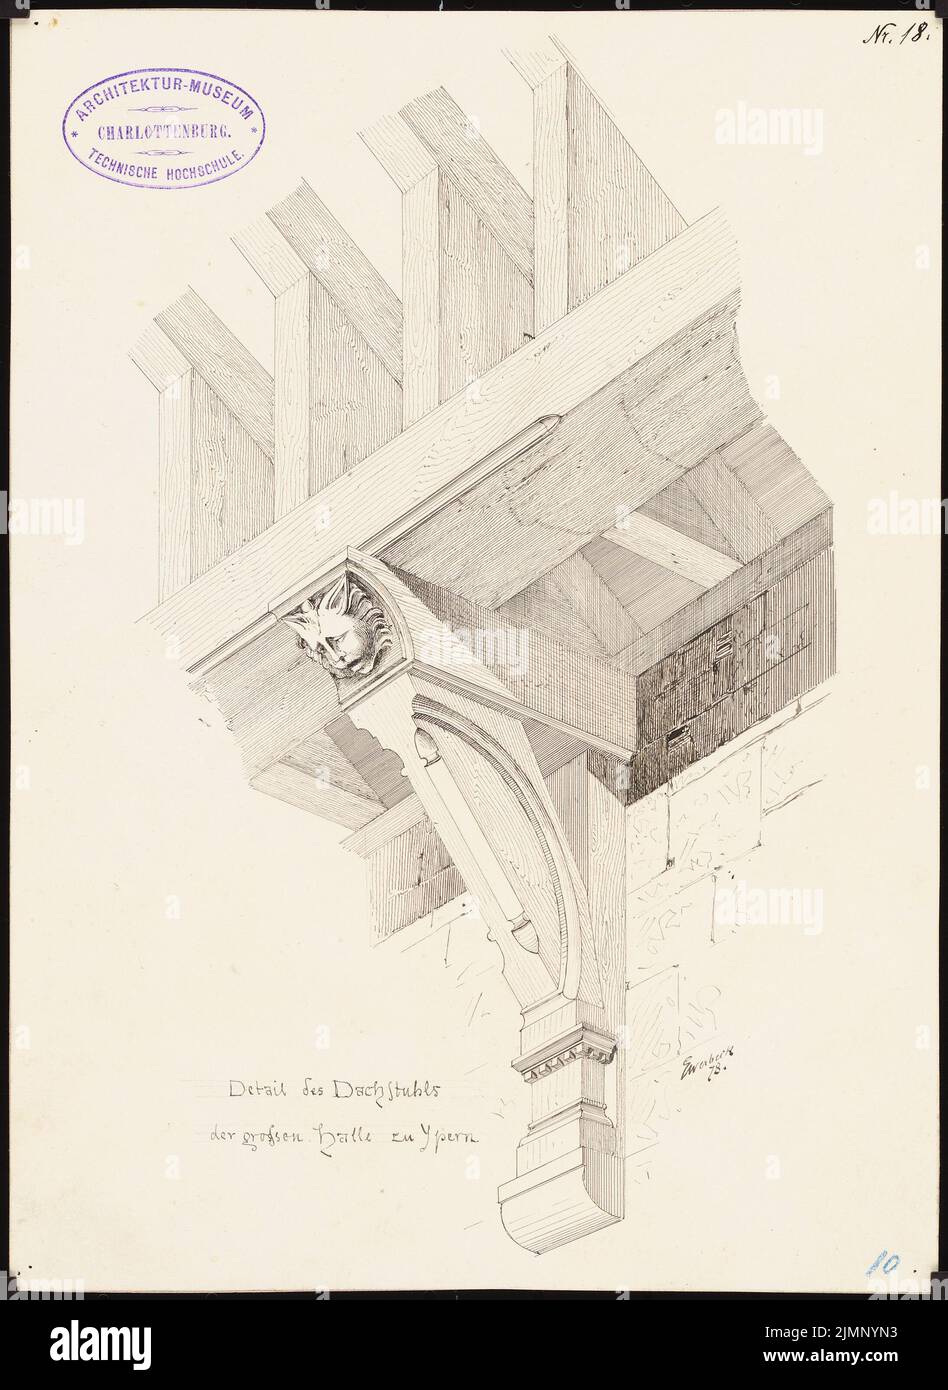 Ewerbeck, Franz (1839-1889), Details from the roof structure of the Great Hall in Ypres (1878): Detail. Ink on cardboard, 28.8 x 21 cm (including scan edges) Ewerbeck, Franz  (1839-1889): Details vom Dachstuhl der Großen Halle, Ypern Stock Photo